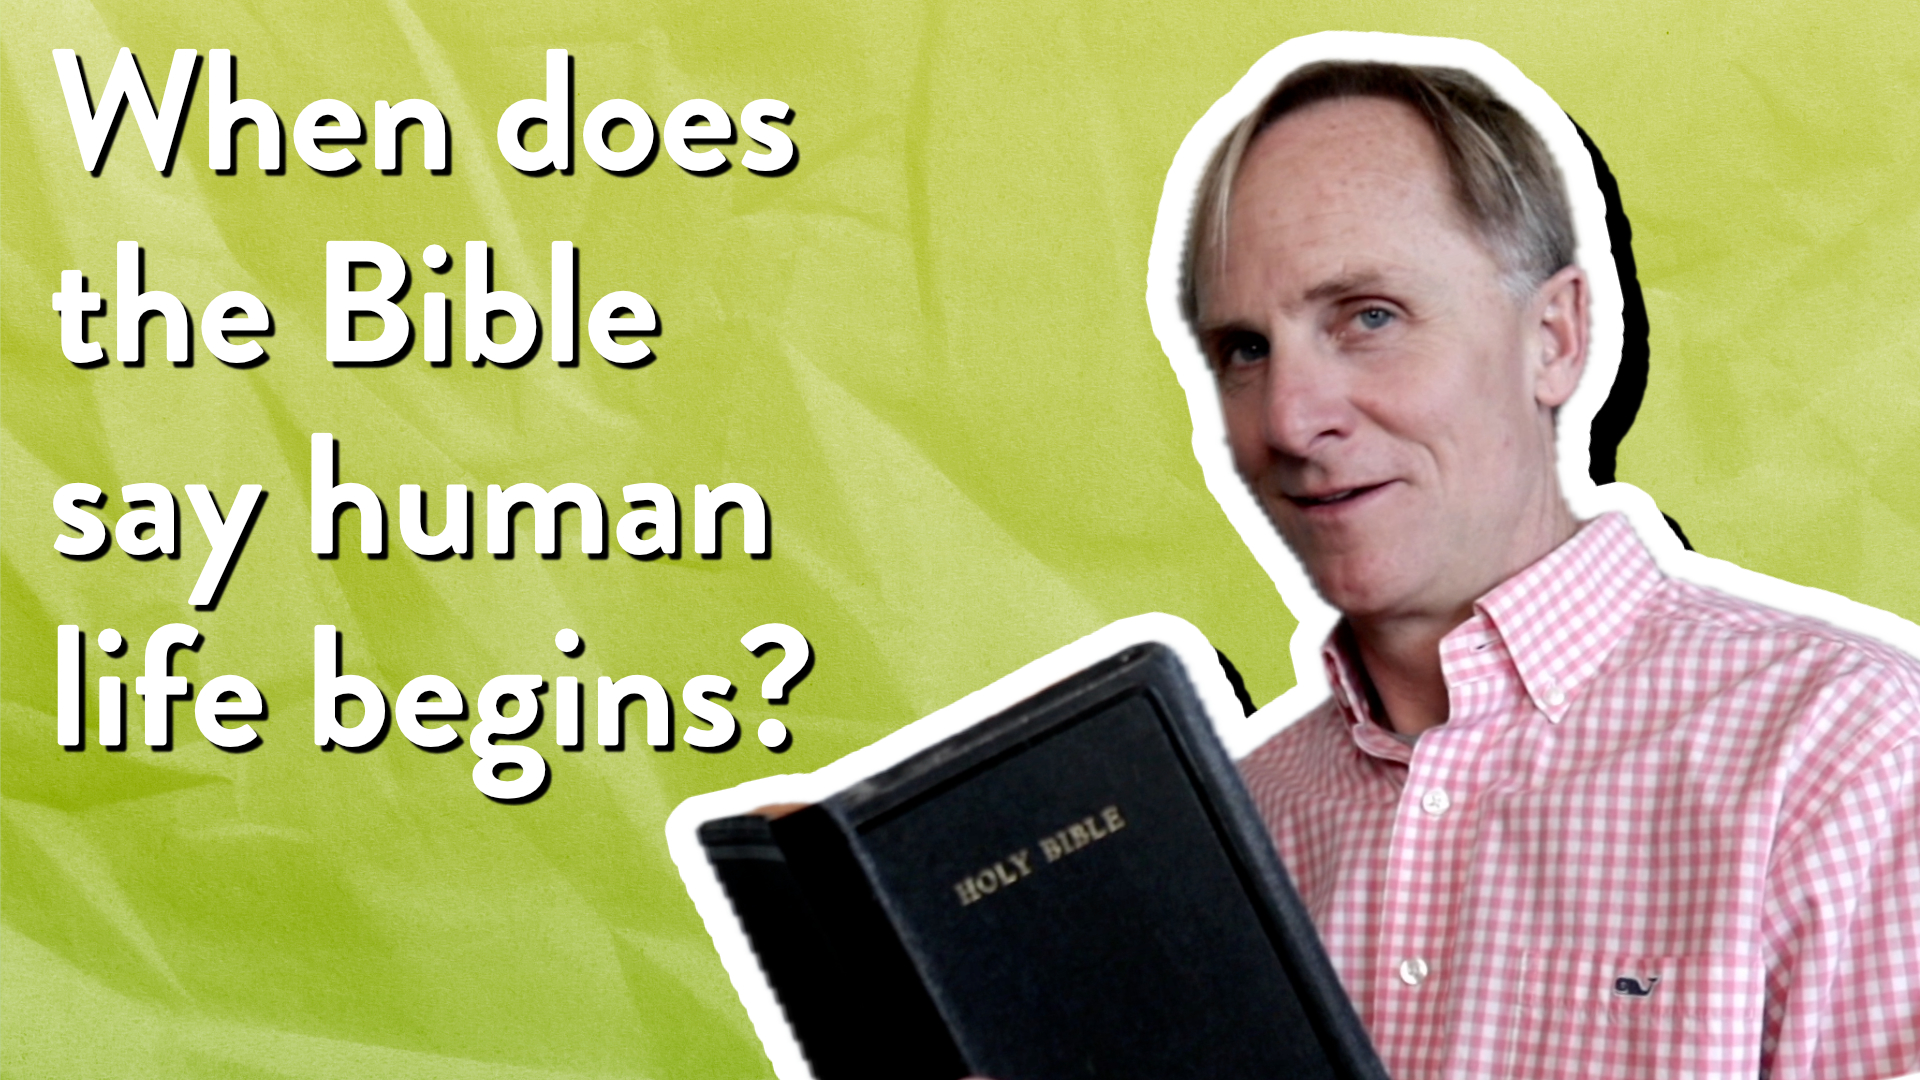 When does the Bible say human life begins?